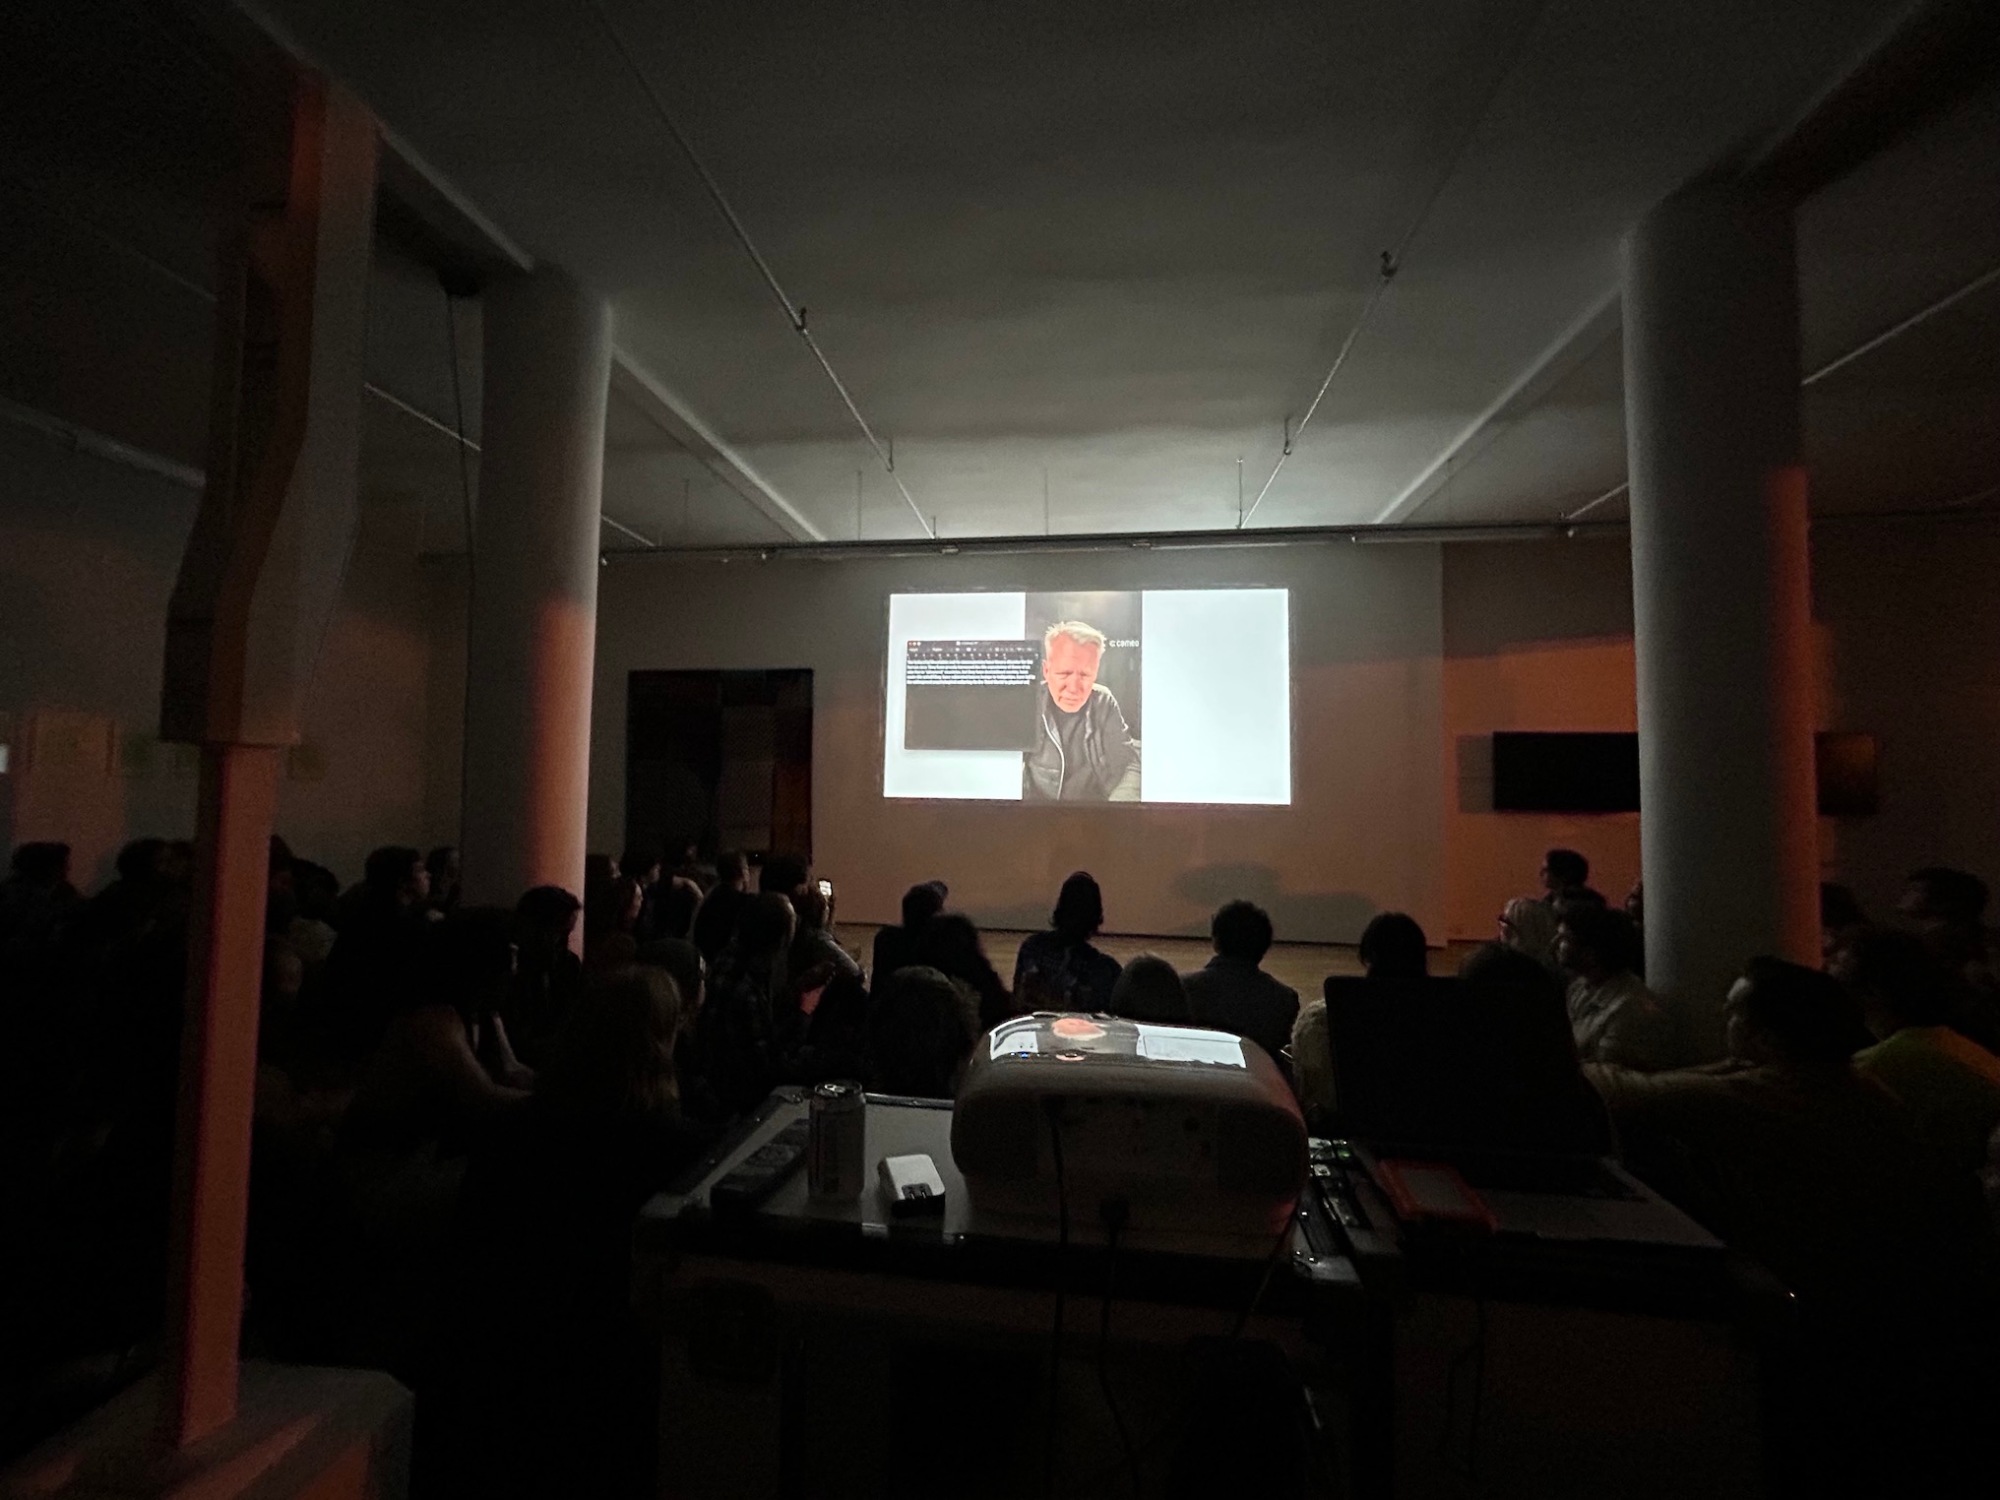 People sit in a dark room looking at a video projected on the wall.